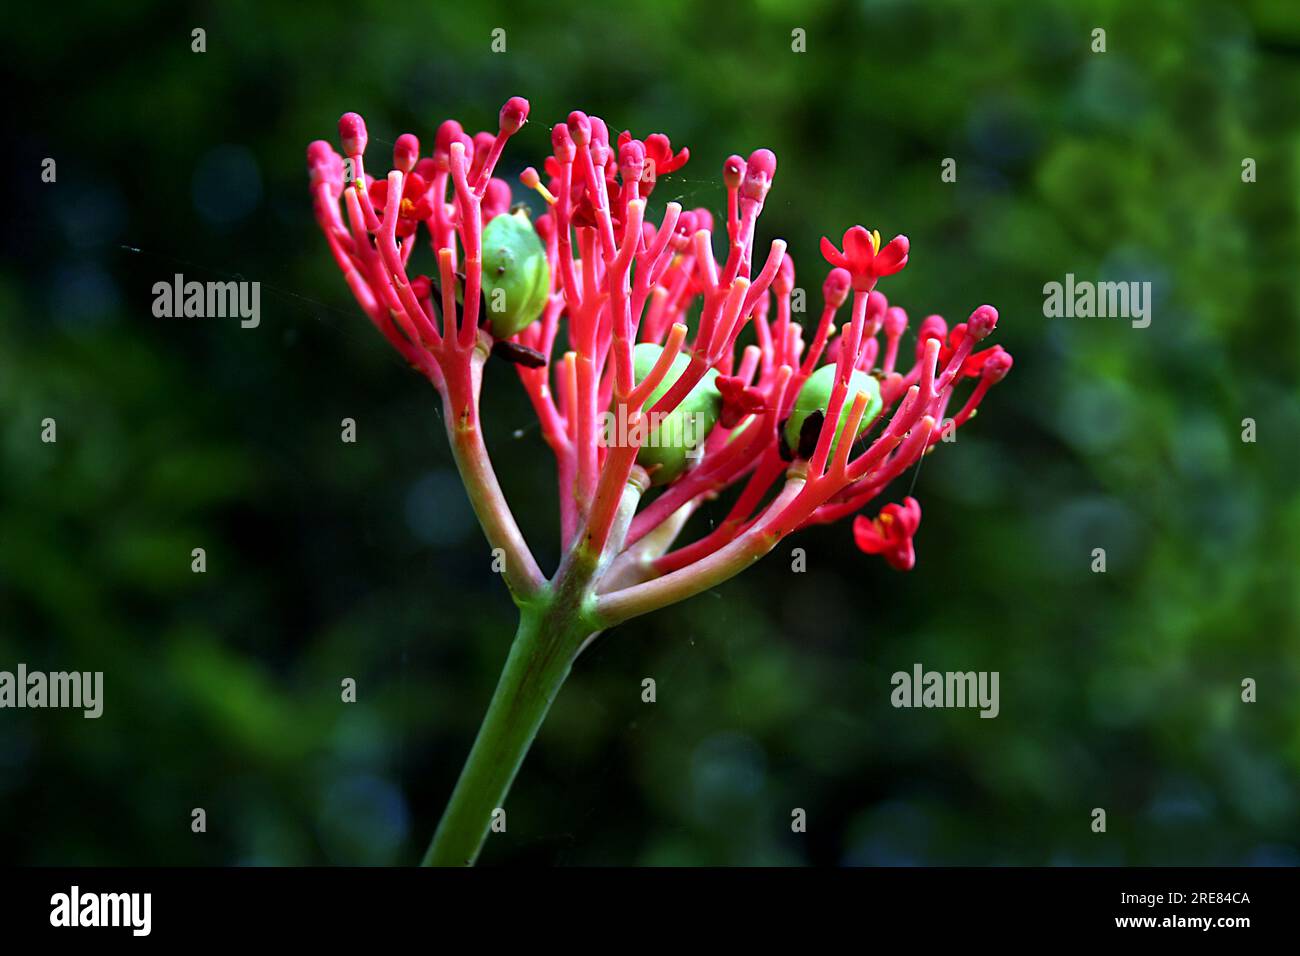 Close-up of Jatropha podagrica (Buddha Belly plant) bloom sot against against blurry green background Stock Photo